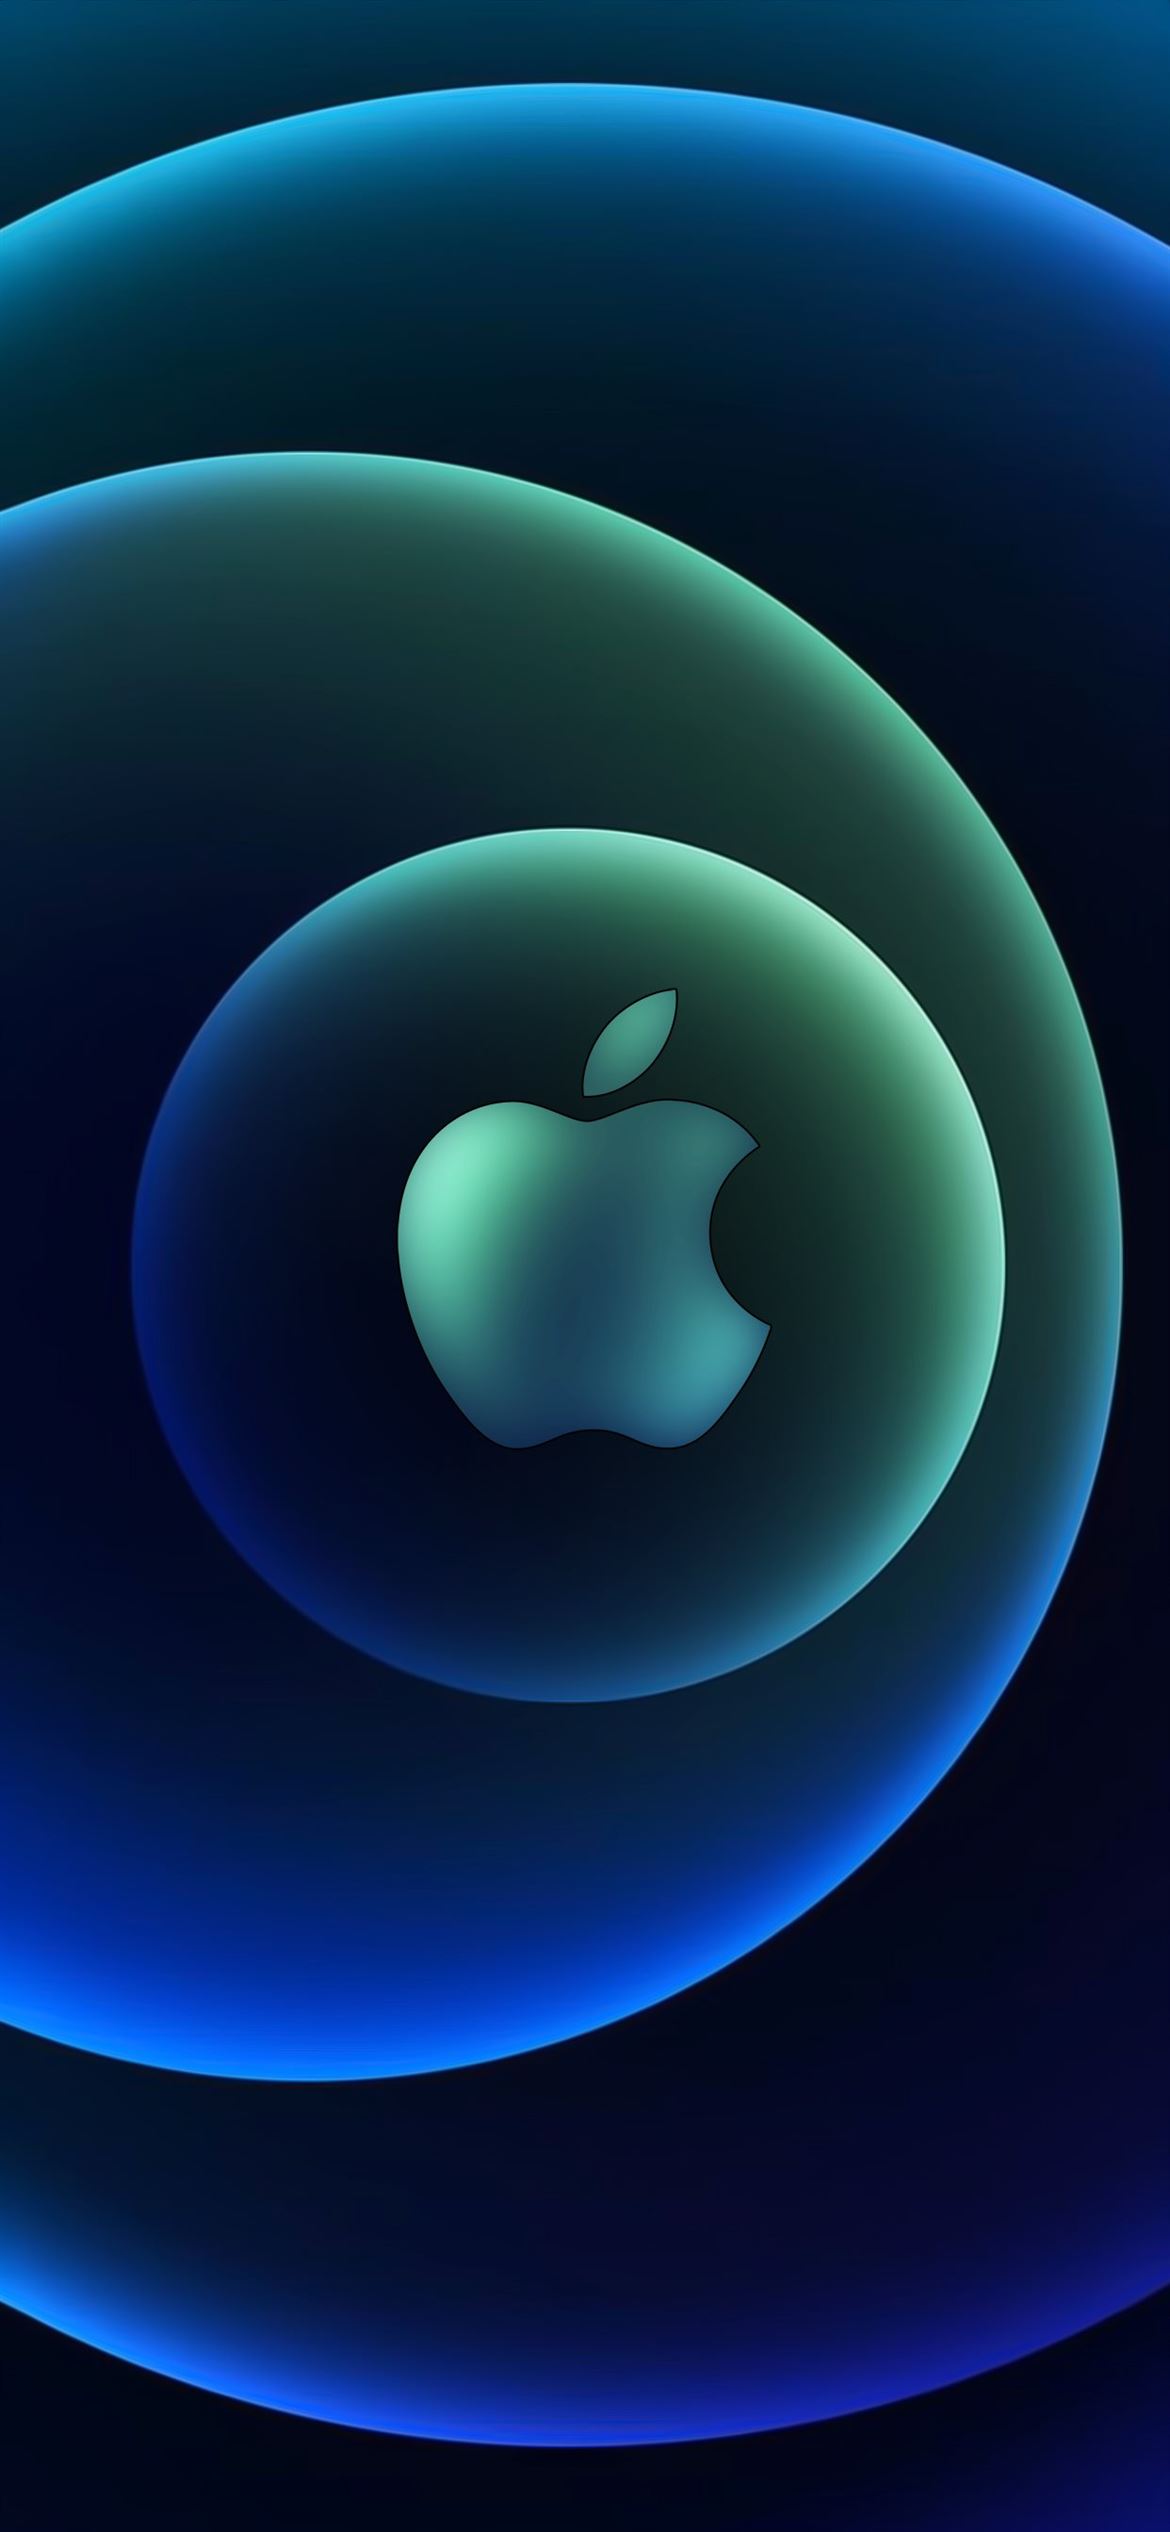 Apple Event 13 Oct Logo Dark by AR7 iPhone Wallpapers Free Download